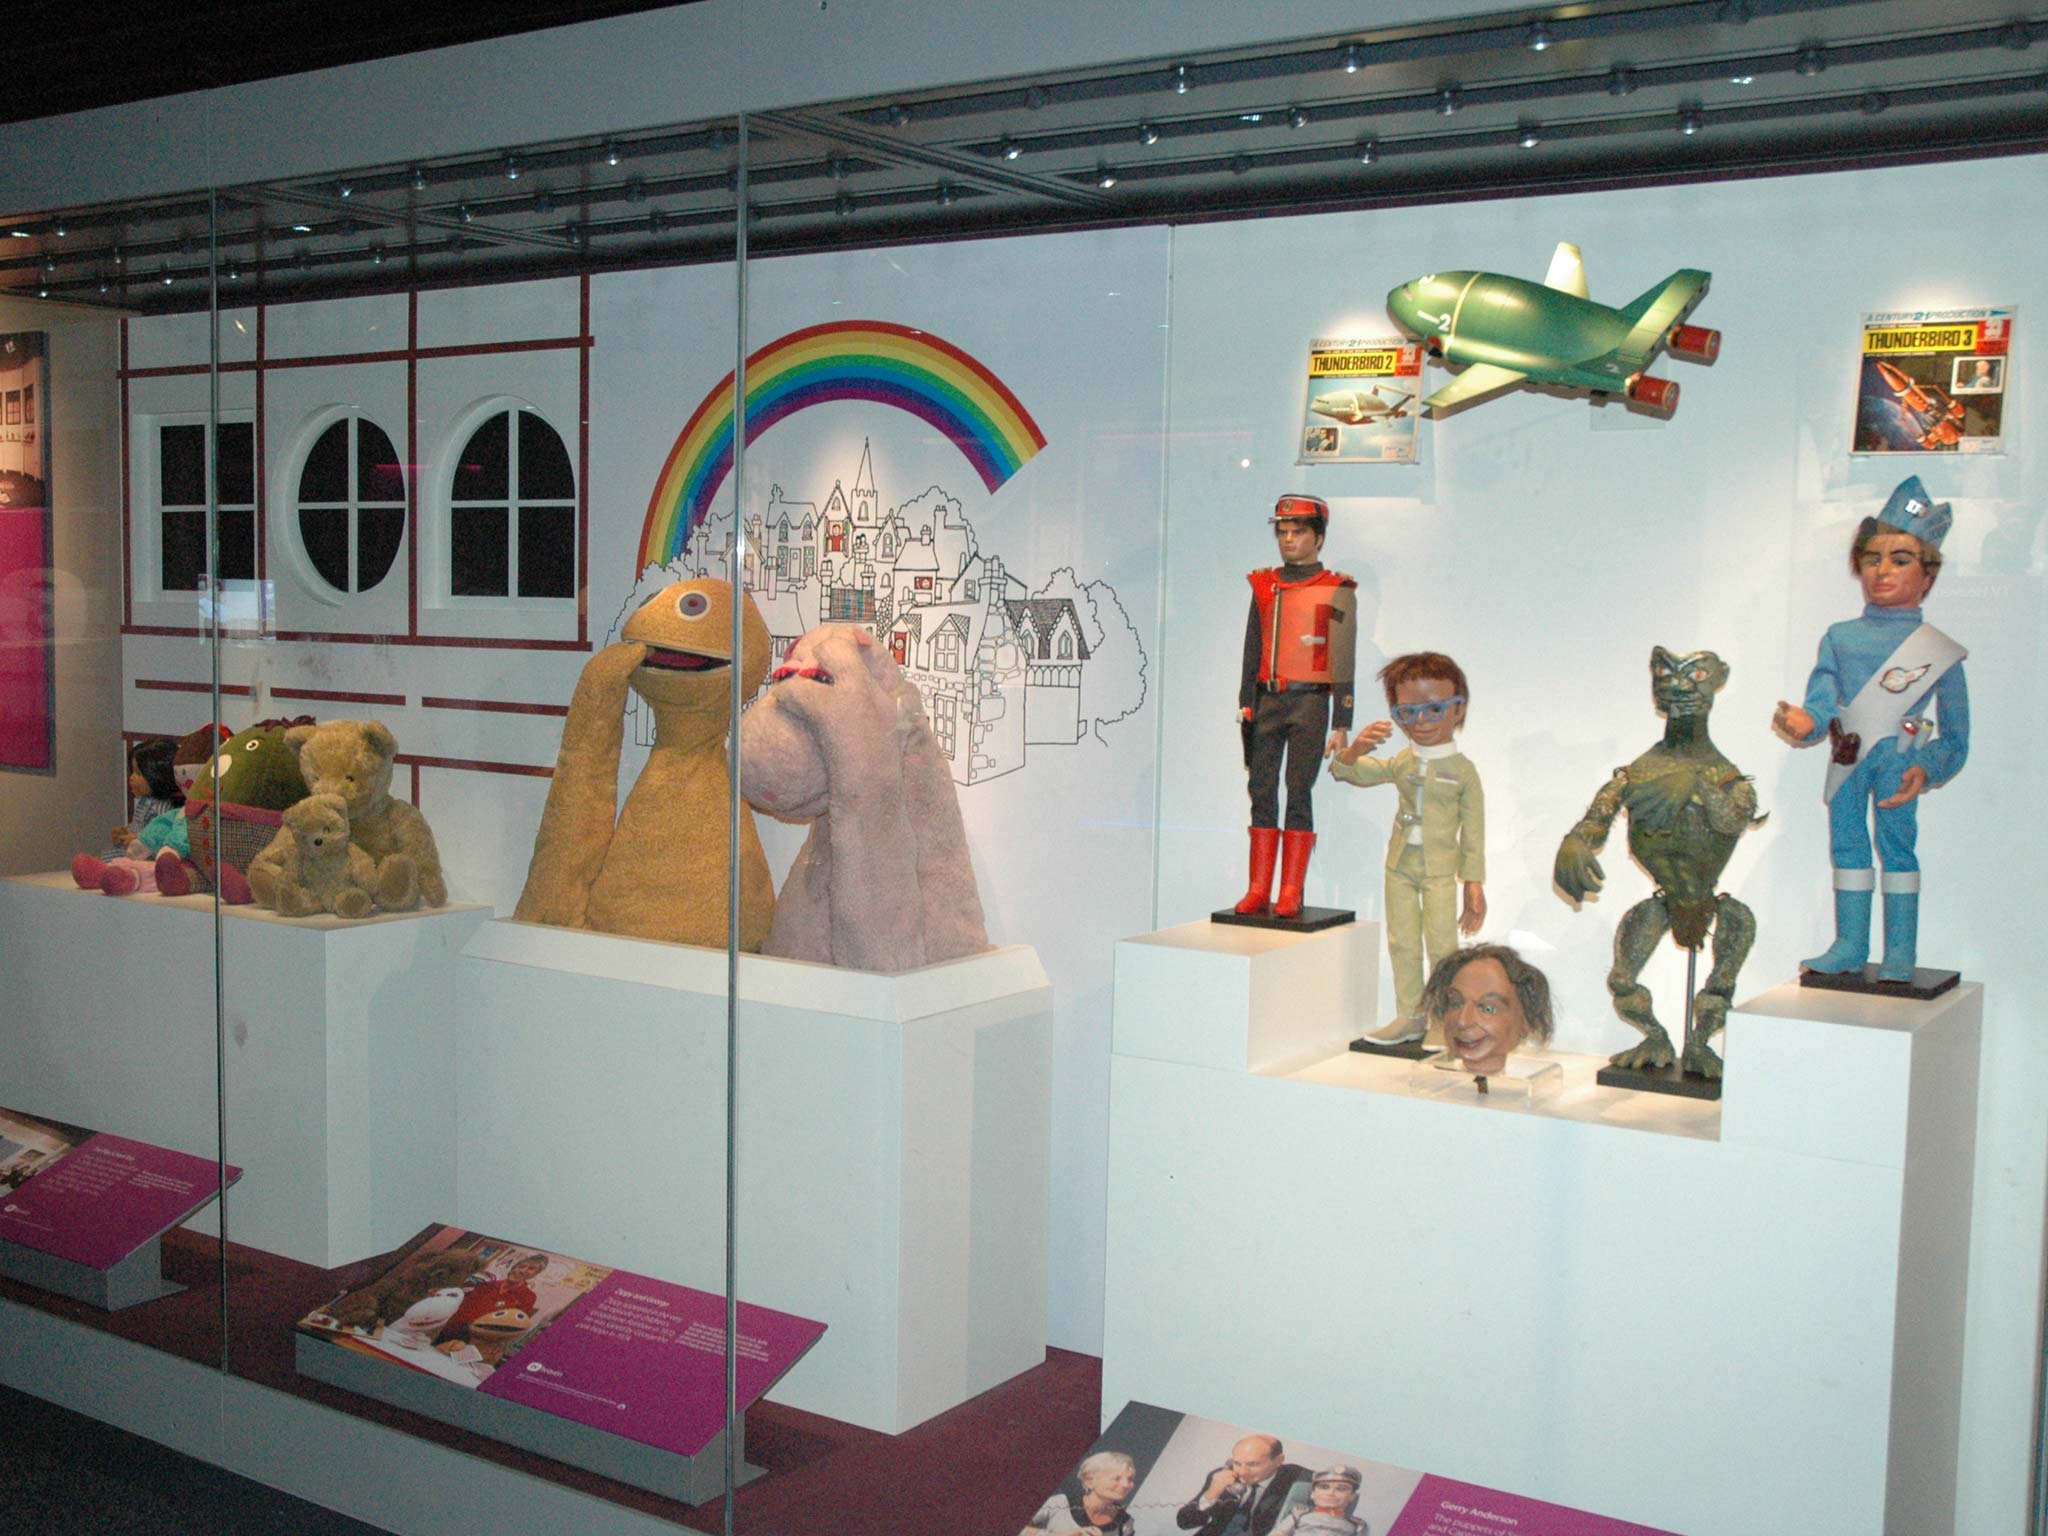 See characters from some of TV’s most loved puppet shows, including Rainbow and Gerry Anderson models